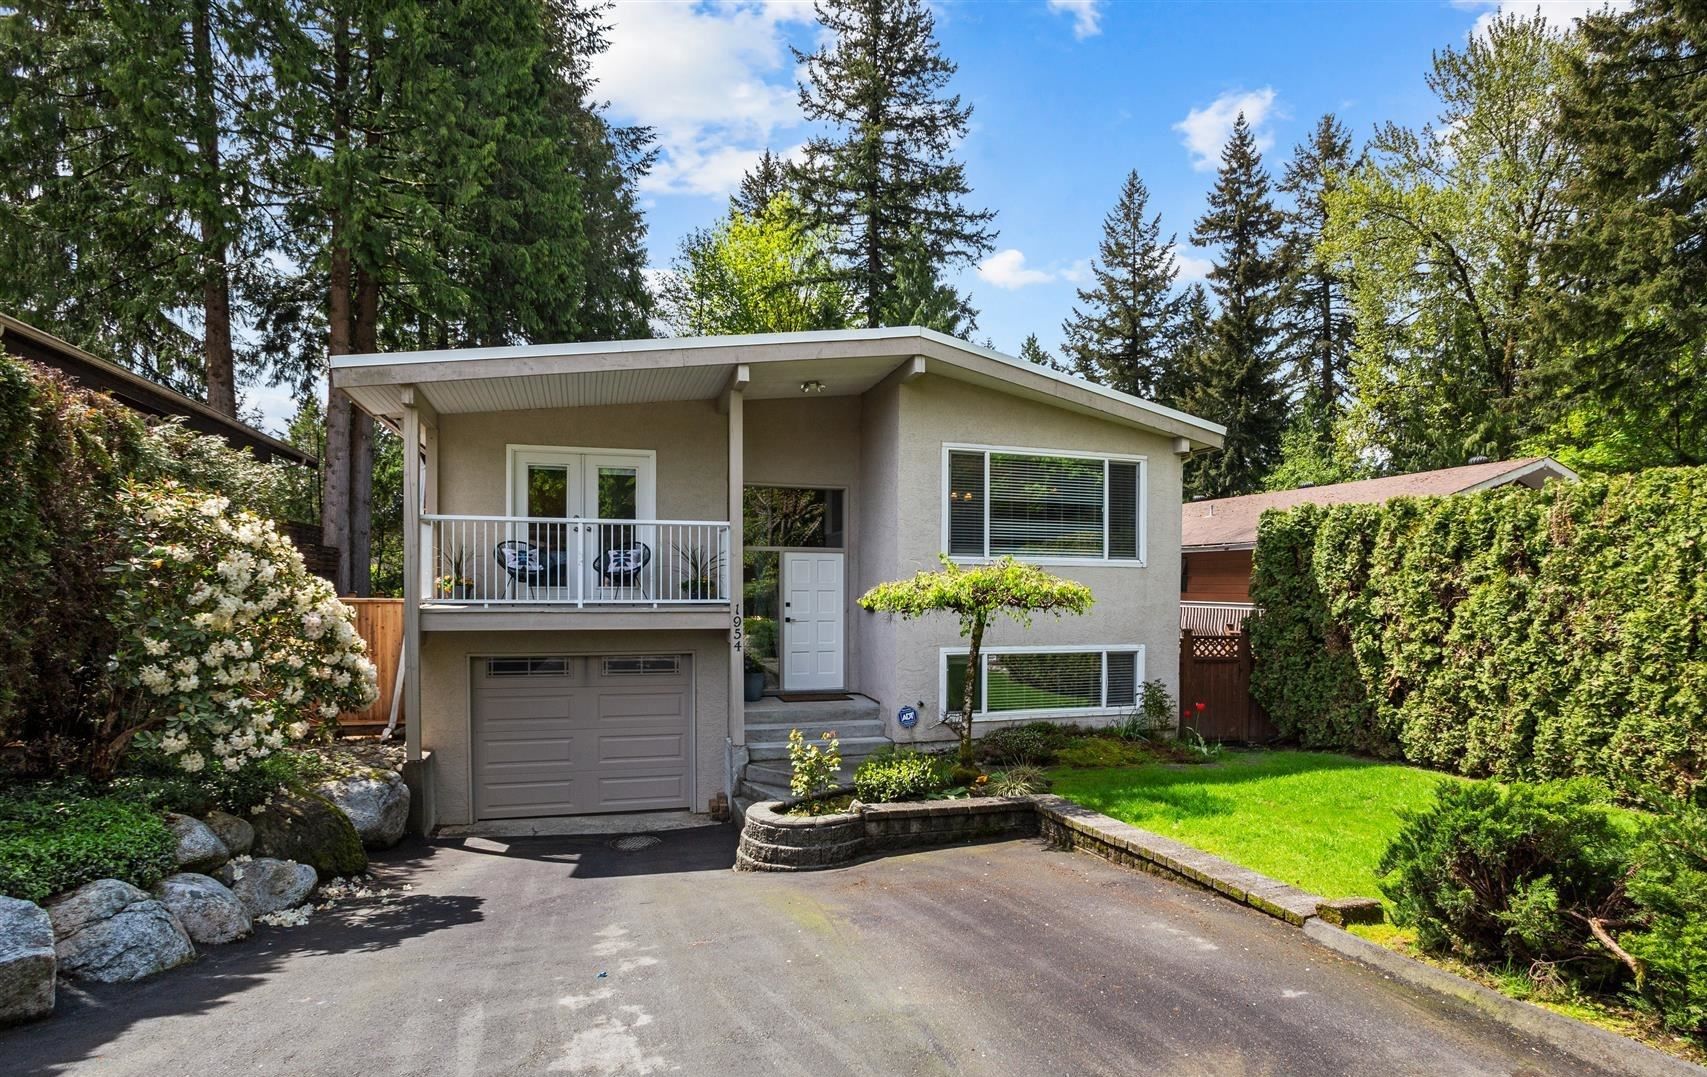 Open House Open House on Sunday, May 22, 2022 11:00AM - 1:00PM